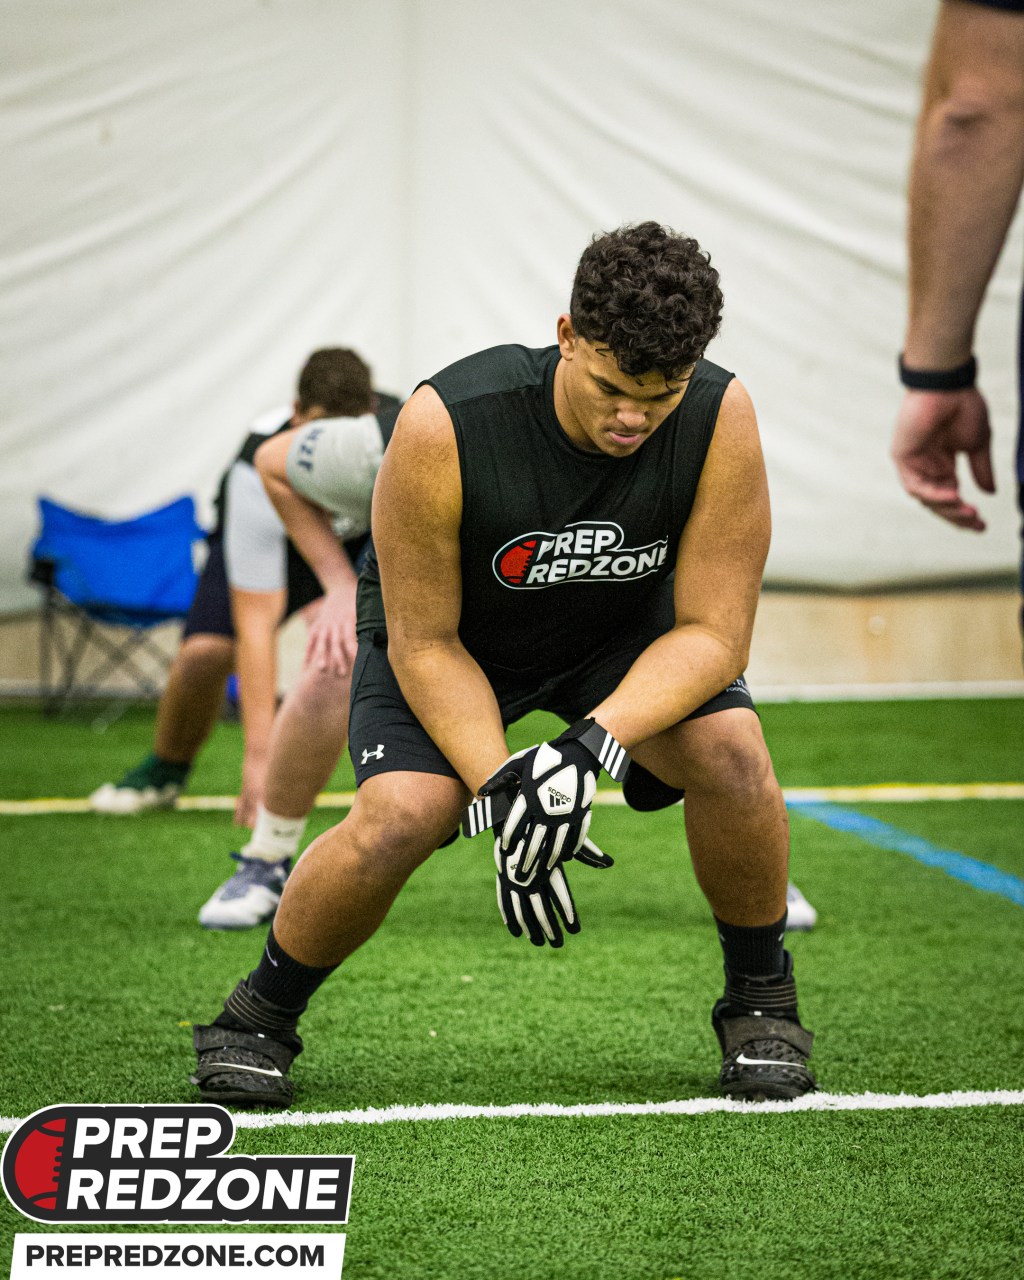 Event Preview: Trenchlab Gauntlet Interesting OL Prospects to See